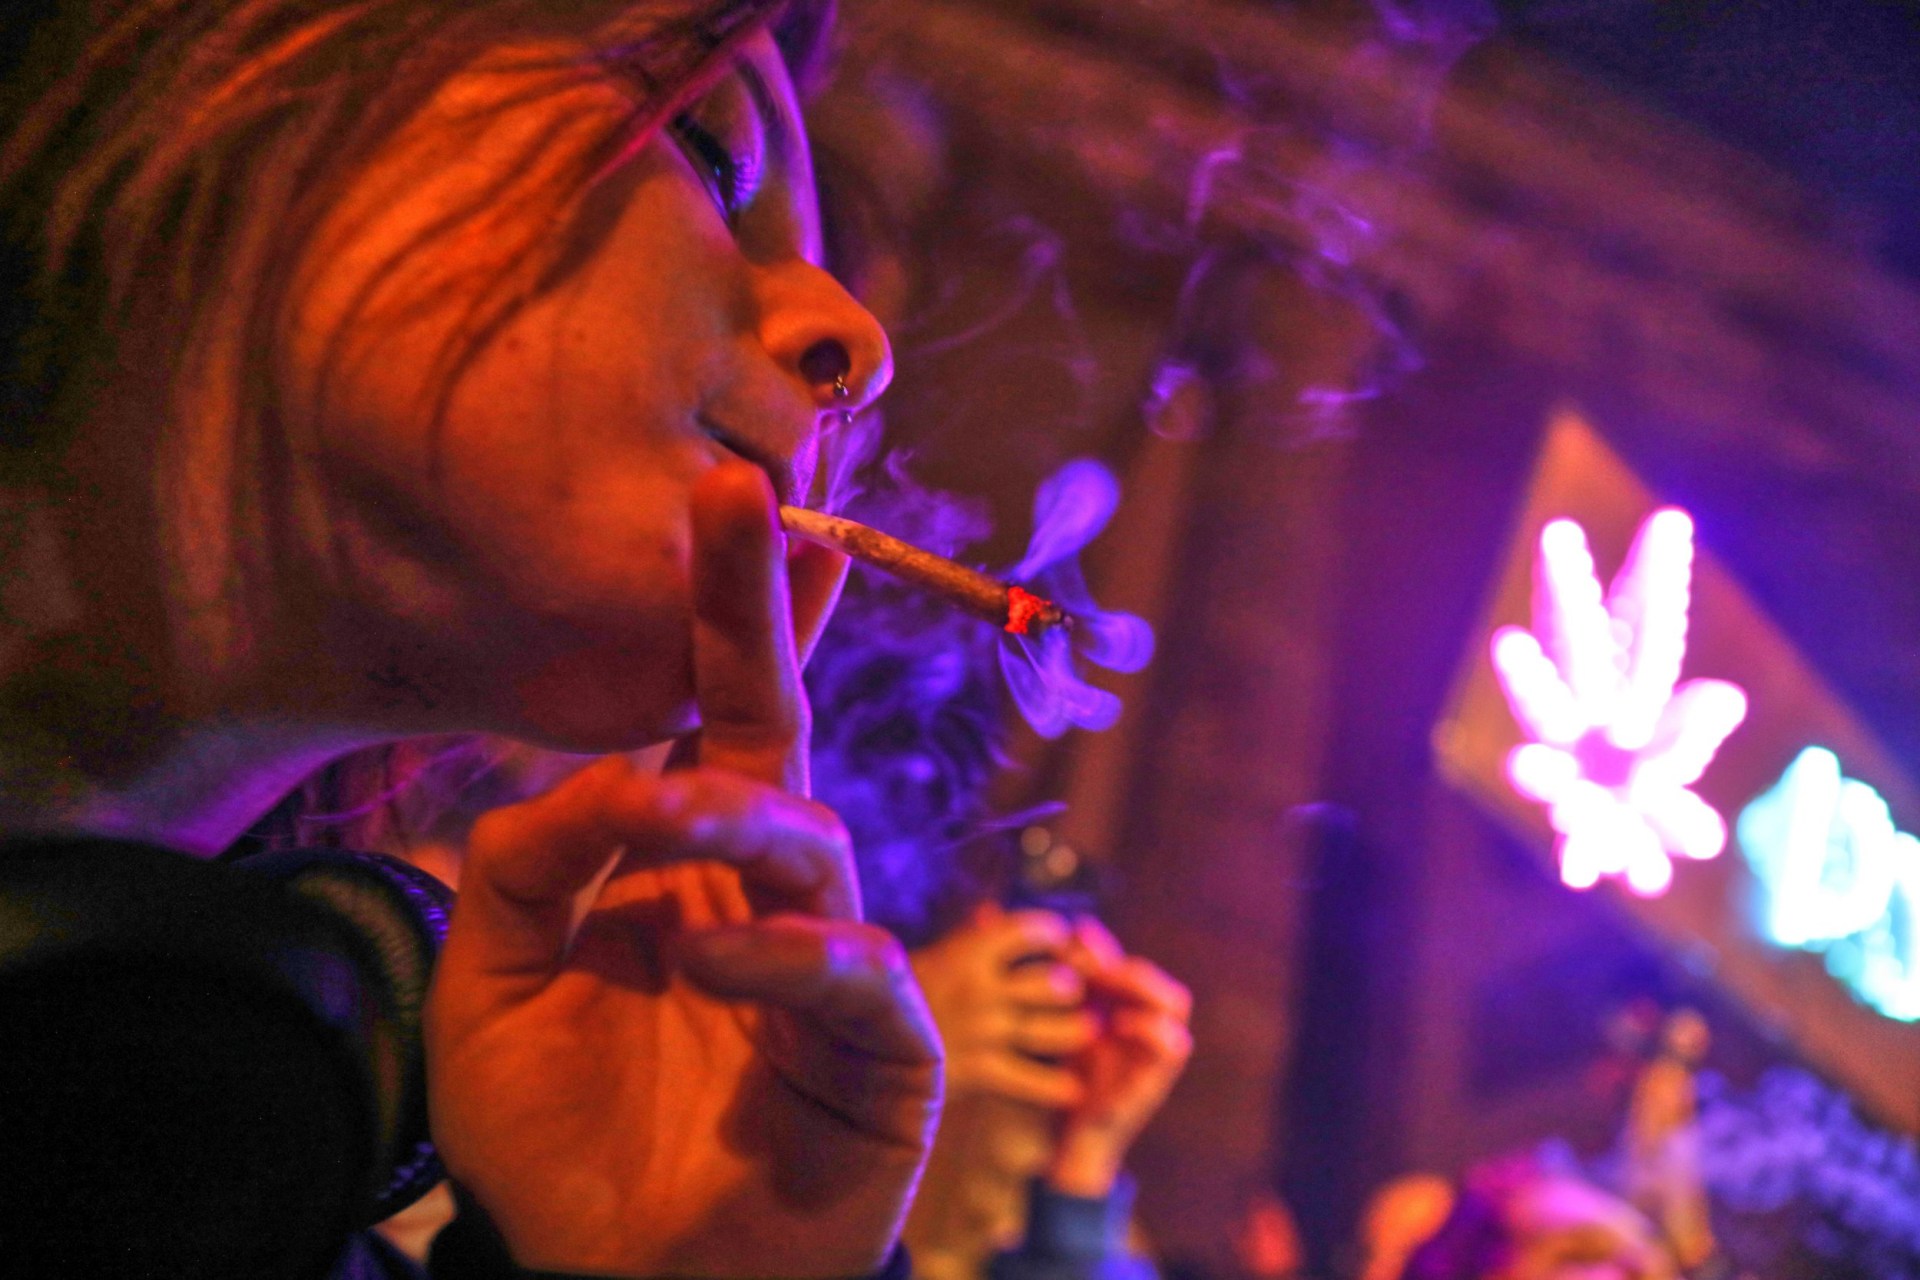 you can now grow and smoke cannabis in germany. what are the new rules?